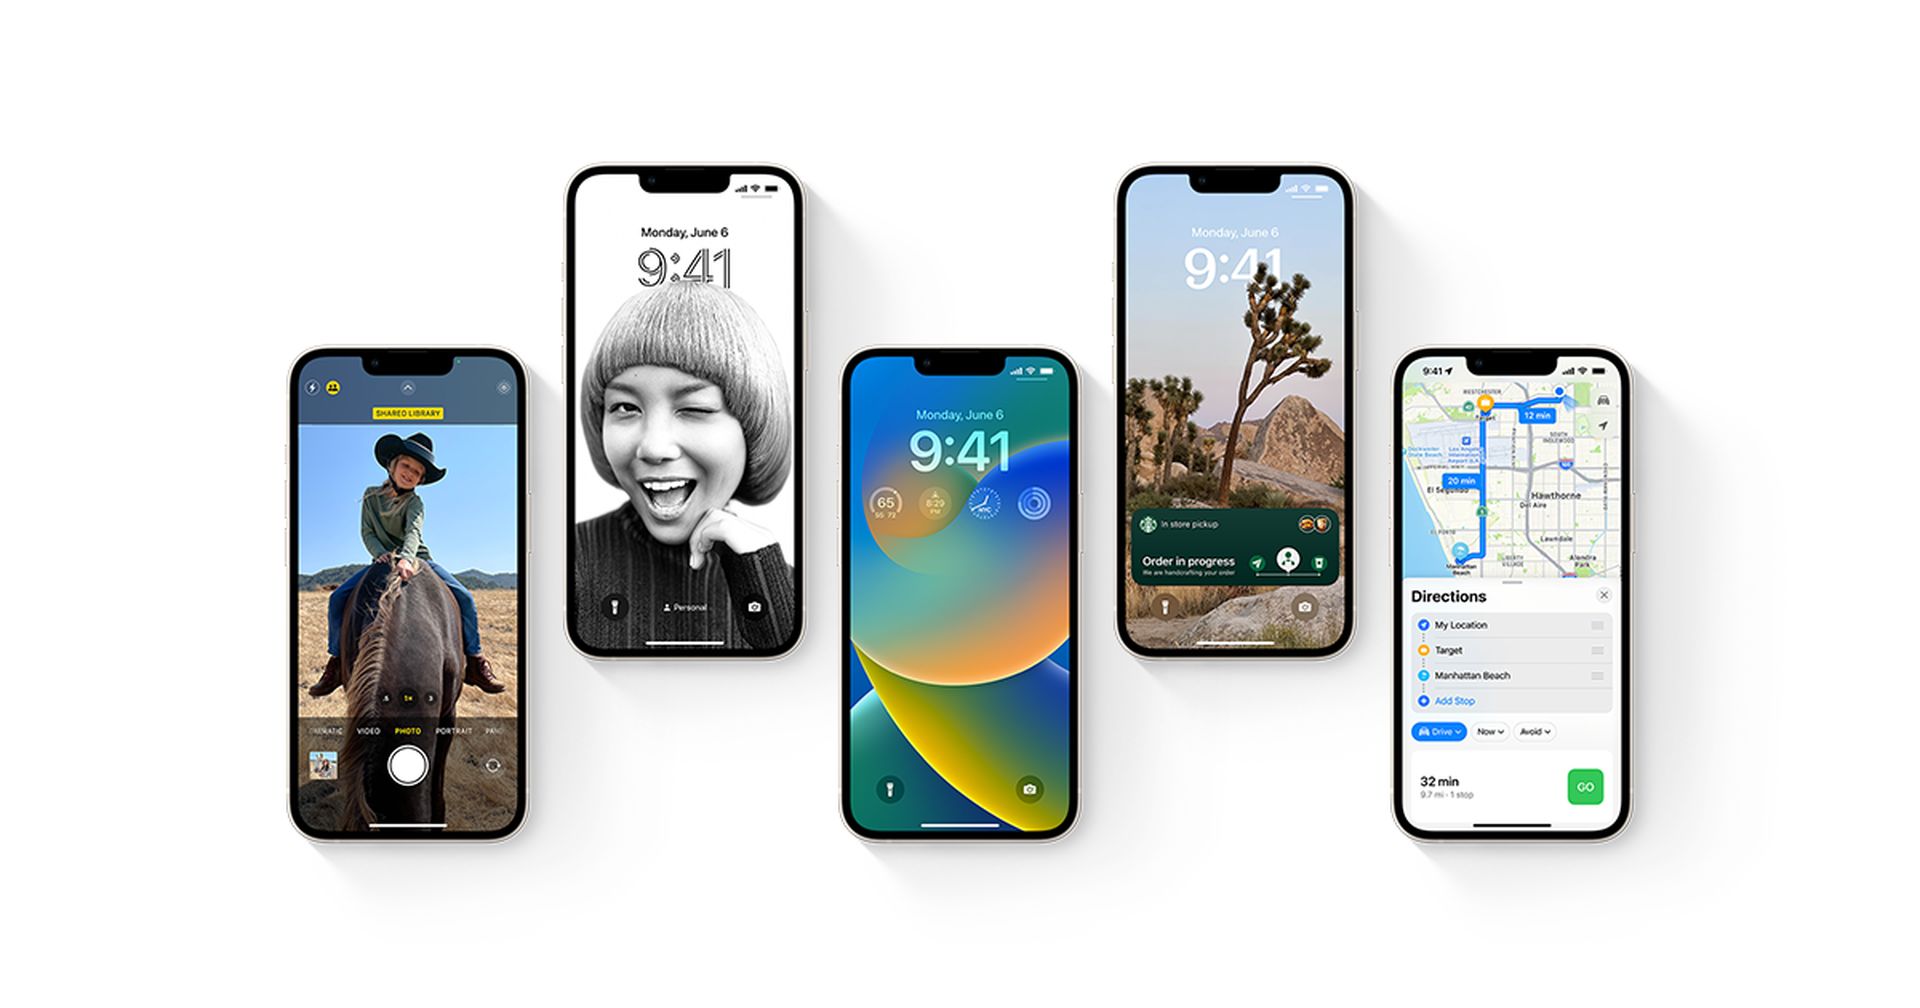 iOS 16 beta is now open to the public. We'll review the top features of iOS 16 in this article.